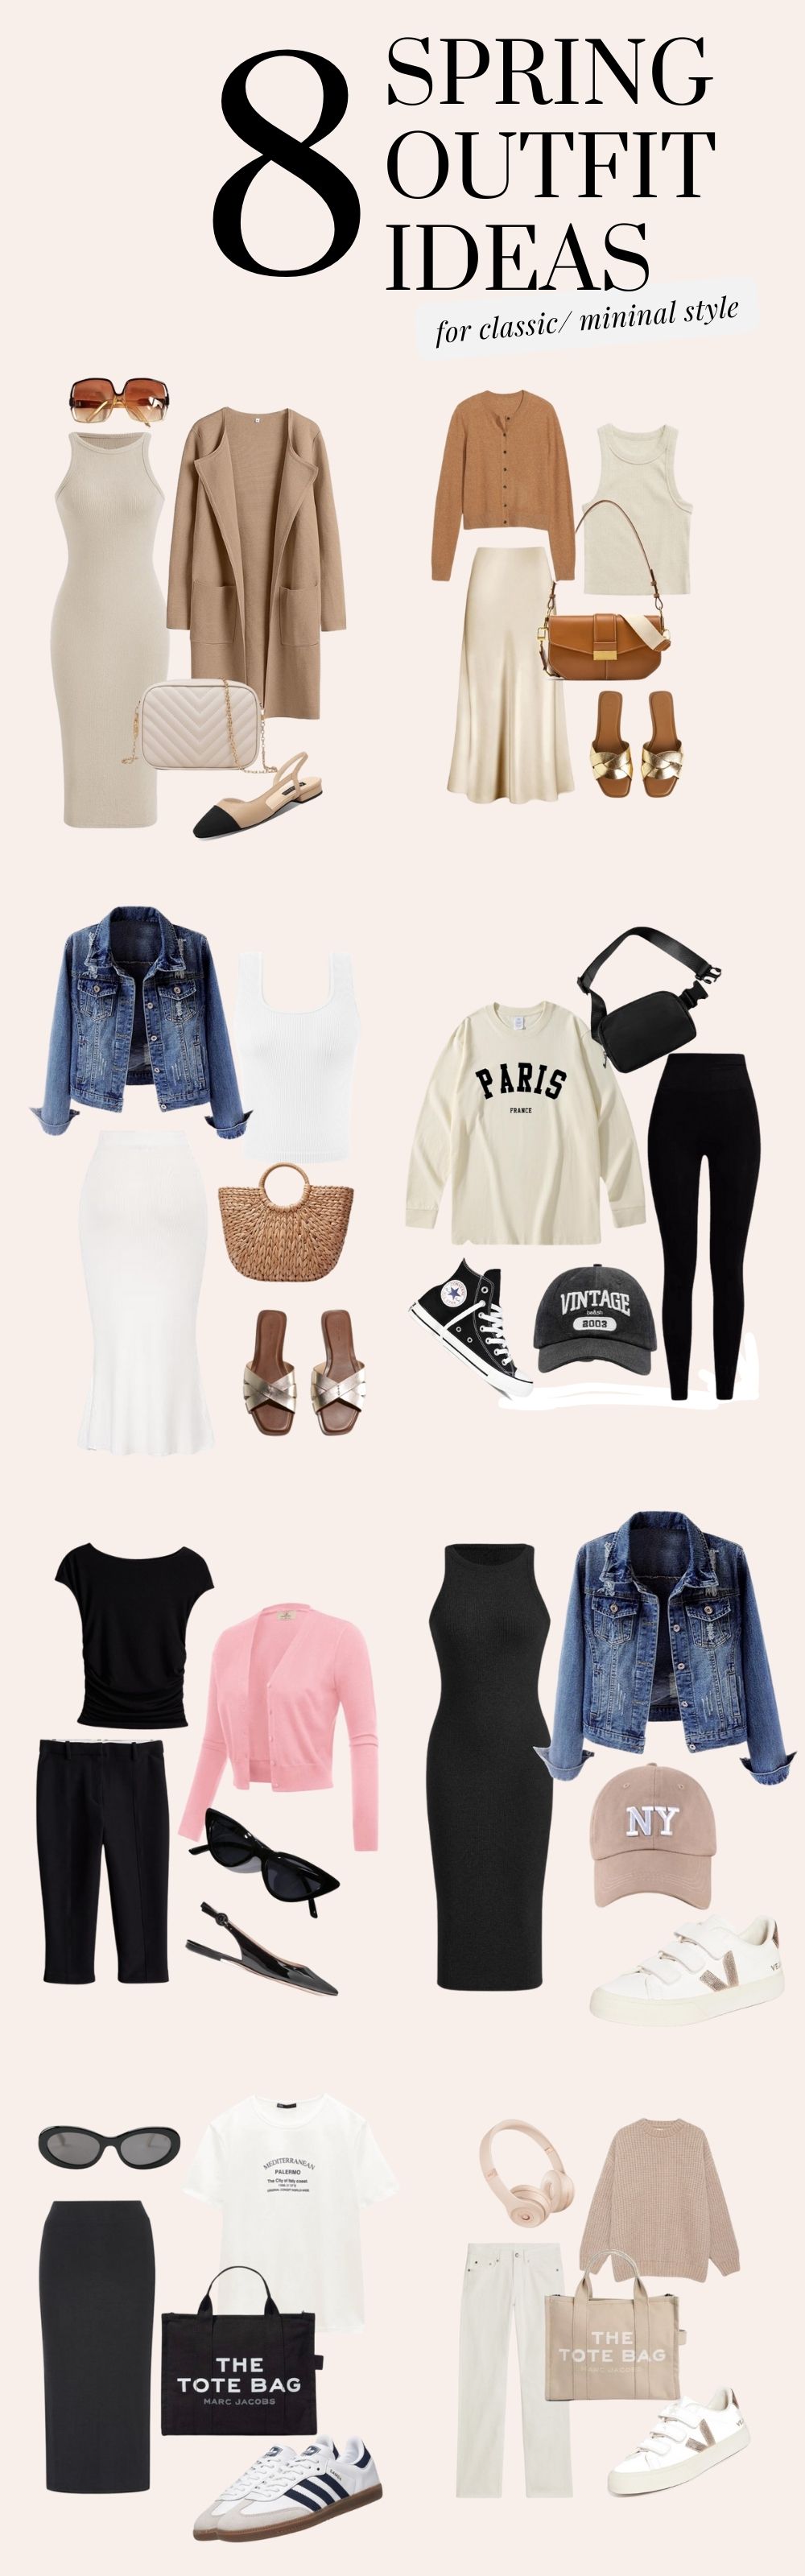 8 spring outfit ideas